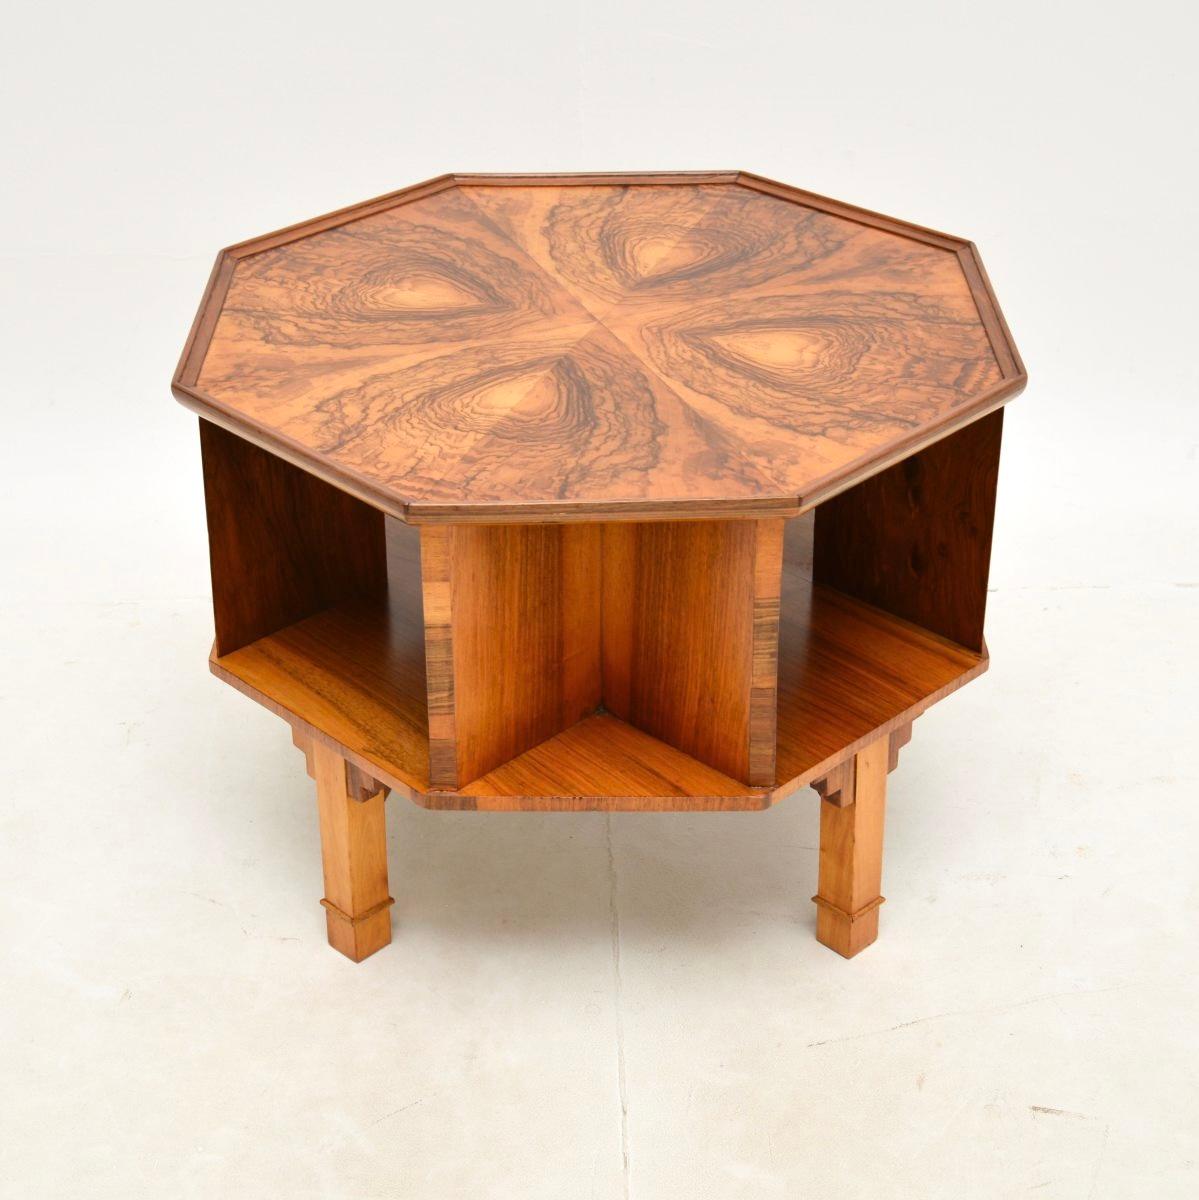 An absolutely stunning Art Deco burr walnut revolving occasional coffee / side table. This was made in England, it dates from the 1920-30’s.

The quality is outstanding, this has a beautiful and useful design. The octagonal top is segmented with